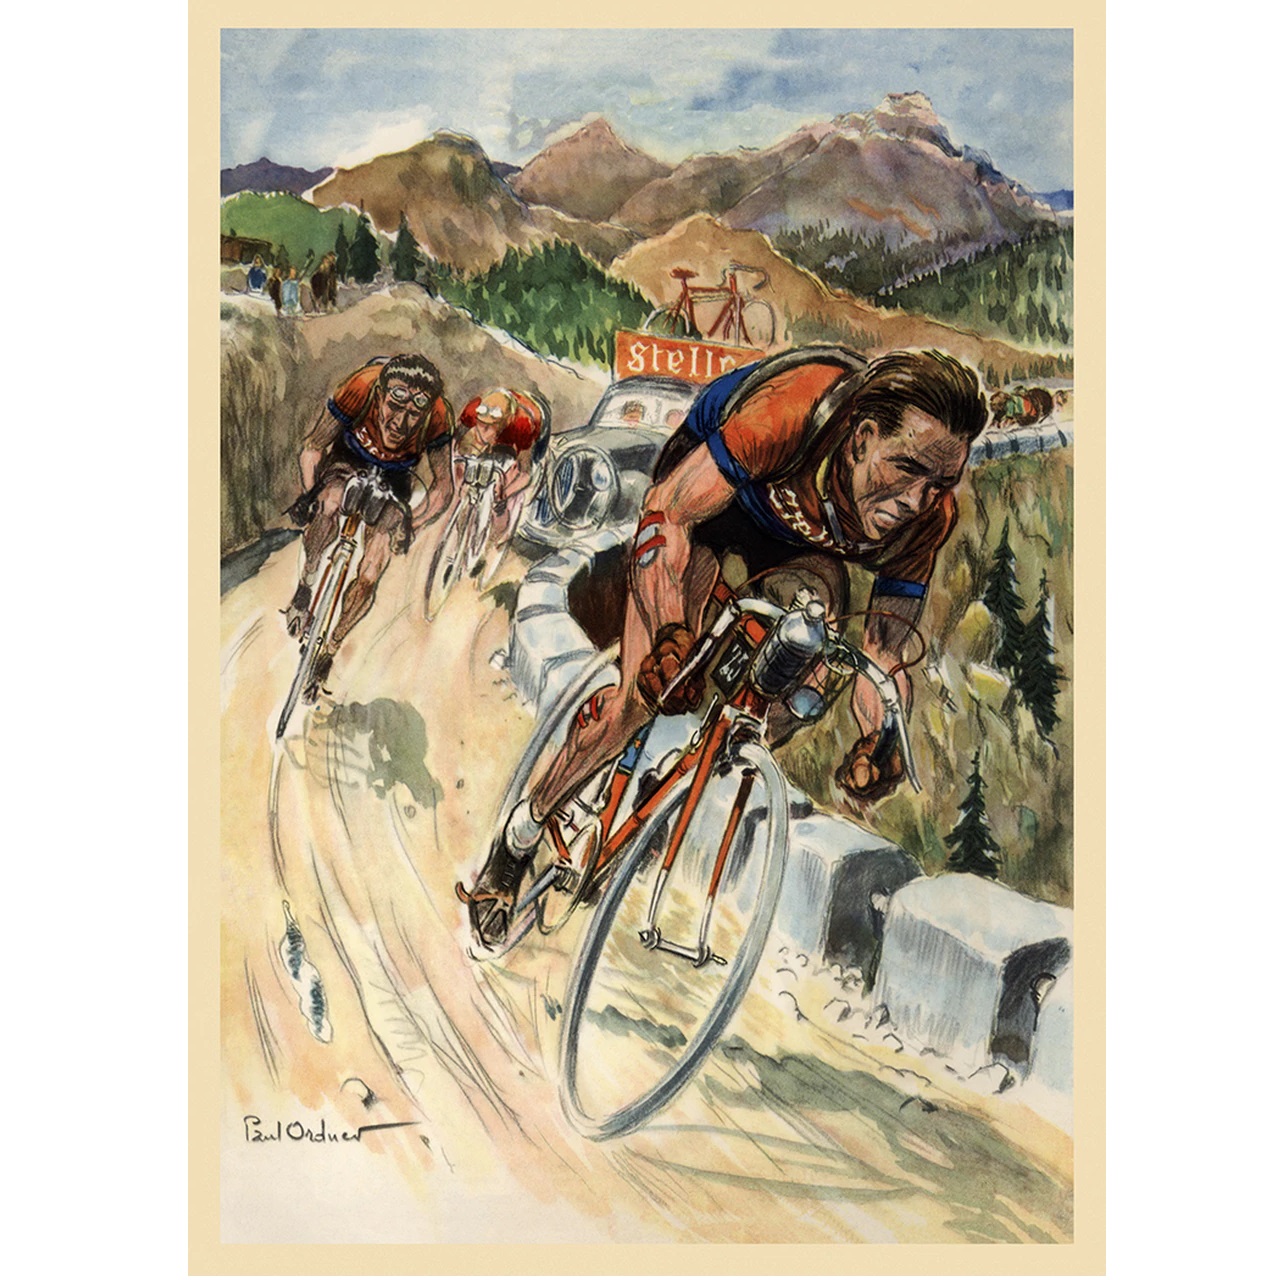 1953 Tour de France Bicycle Poster Vintage Bicycling Art Poster by Paul Ordner